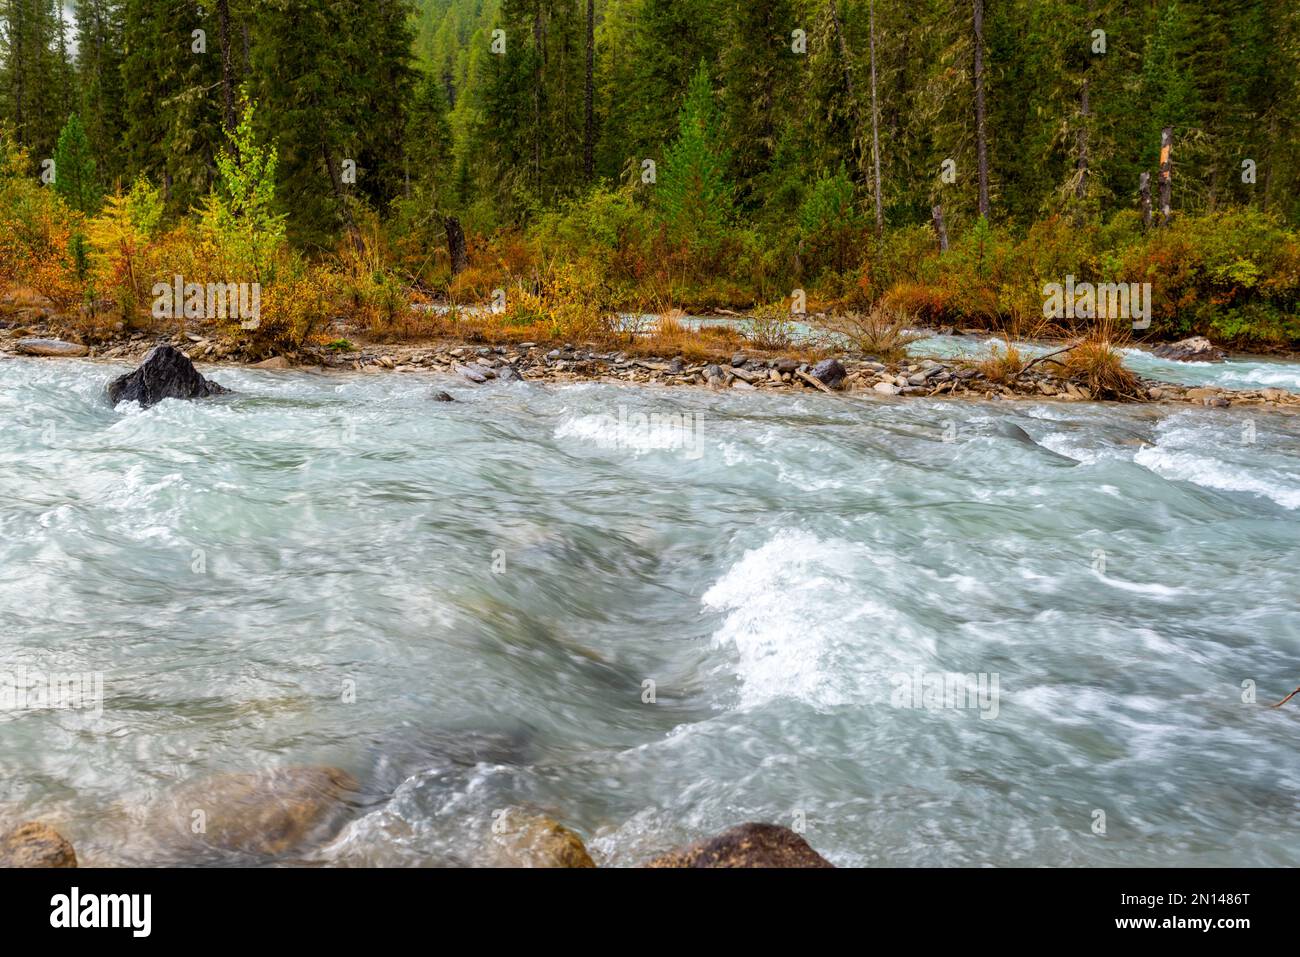 A stormy alpine river with waves against a stone shore and a mountain with a spruce forest after a rain in the morning in Altai. Stock Photo